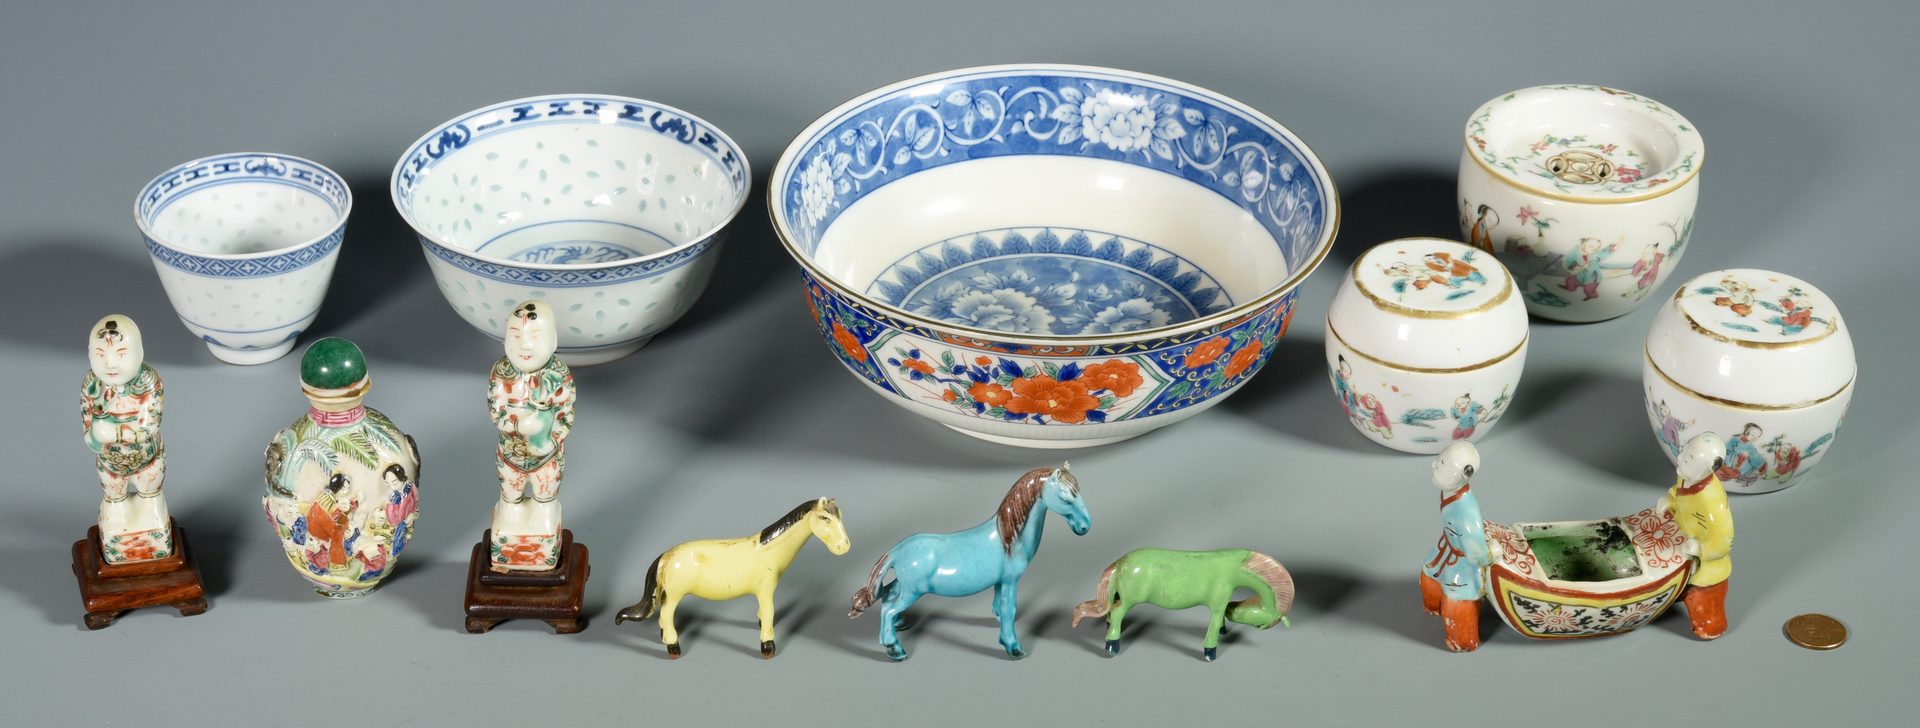 Lot 346: Grouping of Asian Porcelain & Pottery Items, 13 pcs.